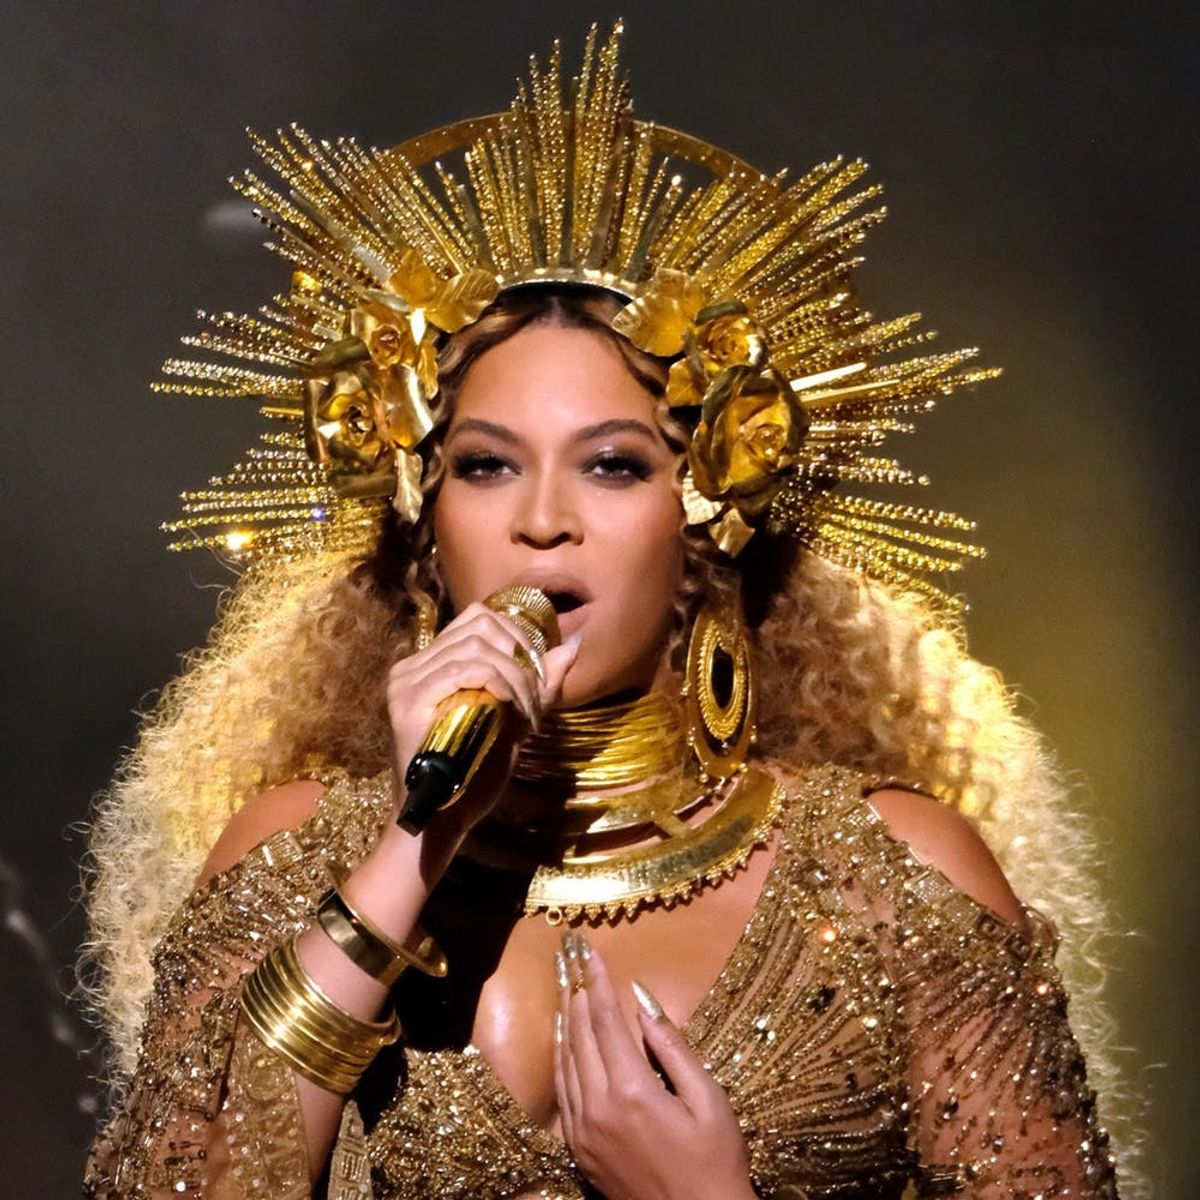 Beyoncé Turned Down a Role in Disney’s Live-Action “Beauty and the Beast”